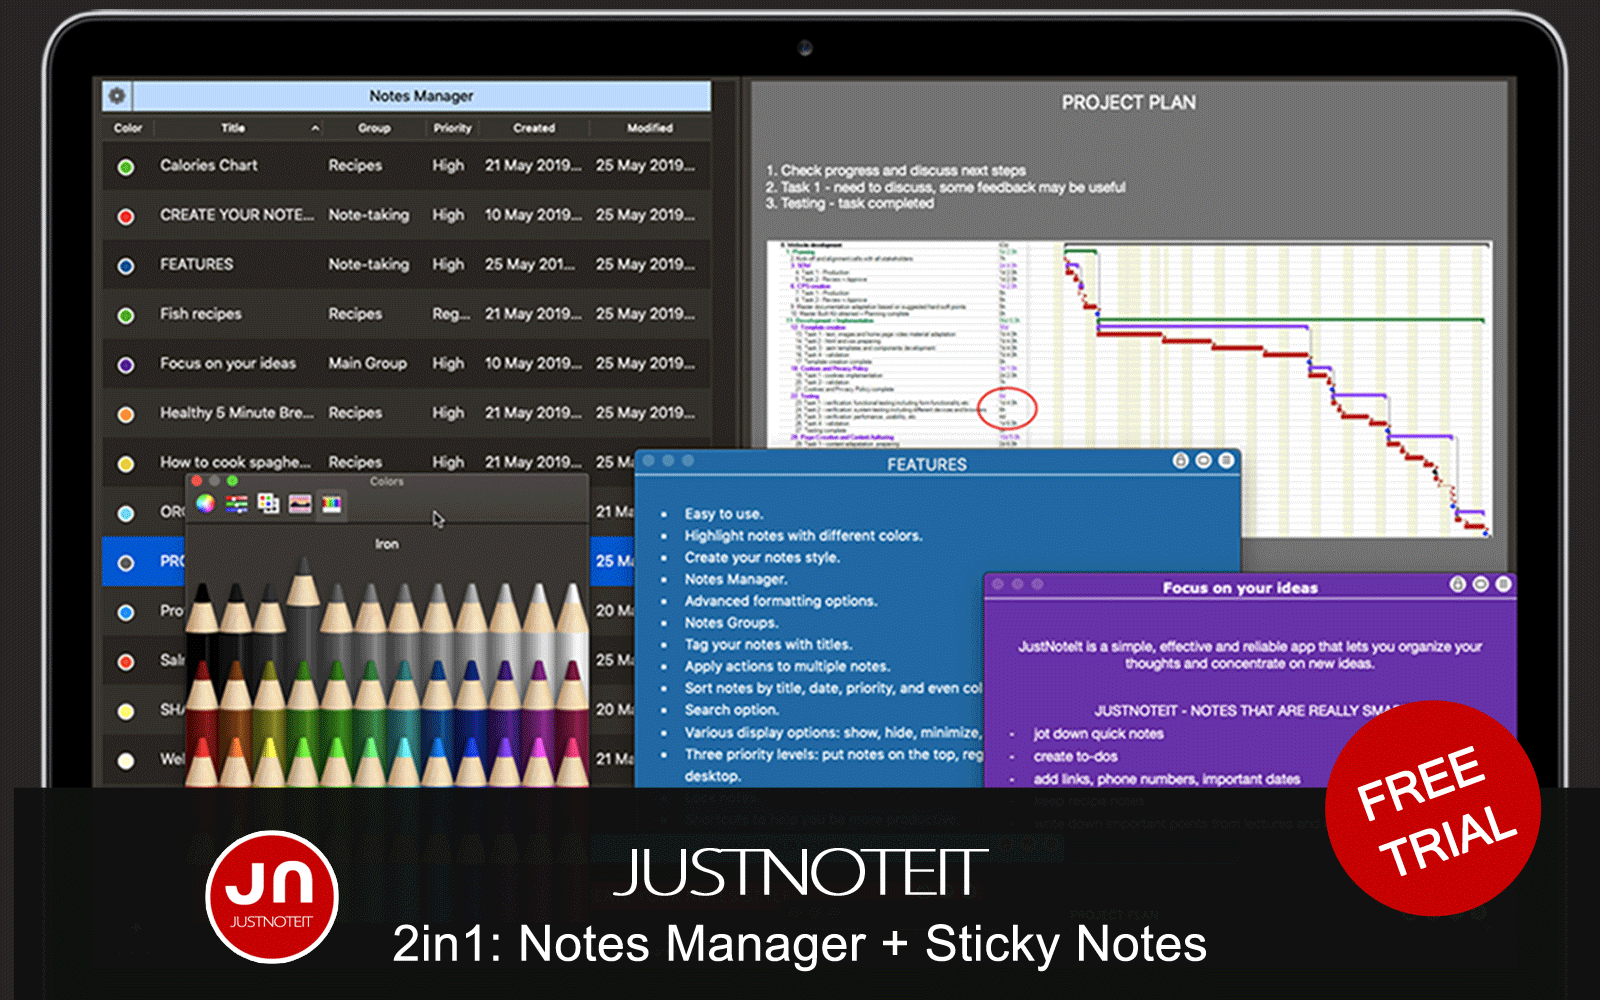 JustNoteIt - Note Manager 2in1